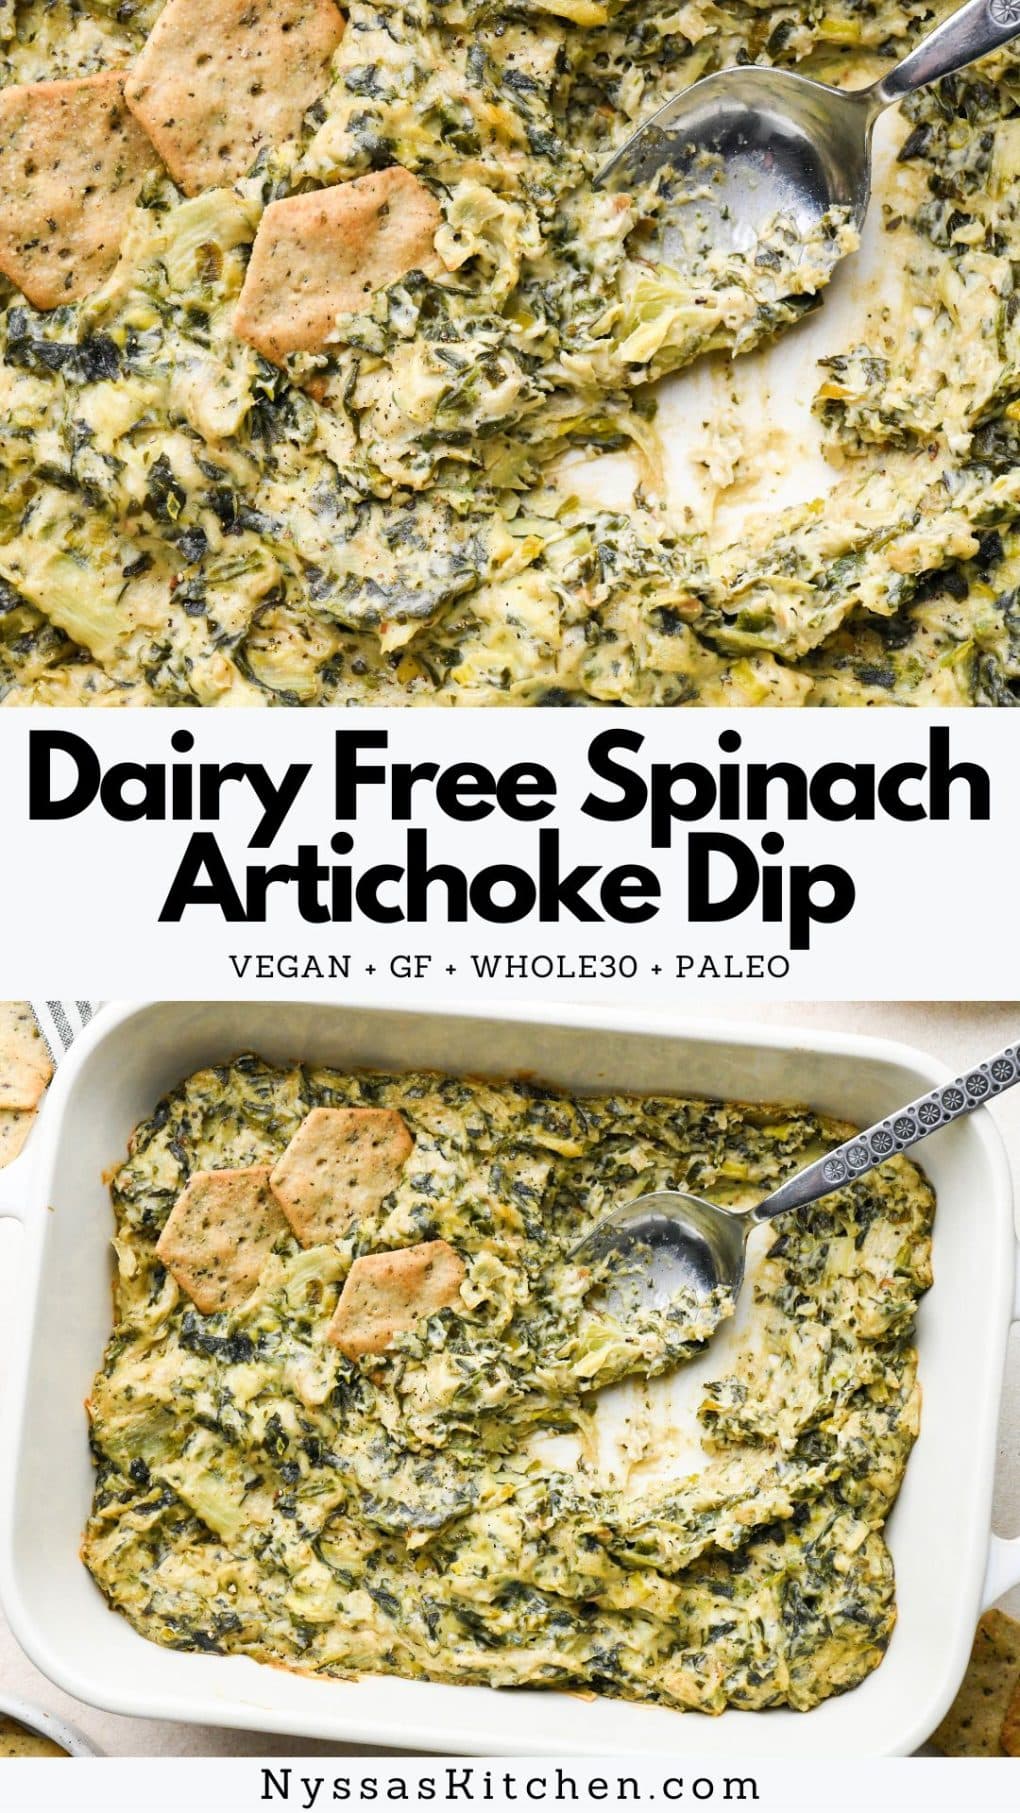 Pinterest pin for Dairy Free Spinach Artichoke Dip